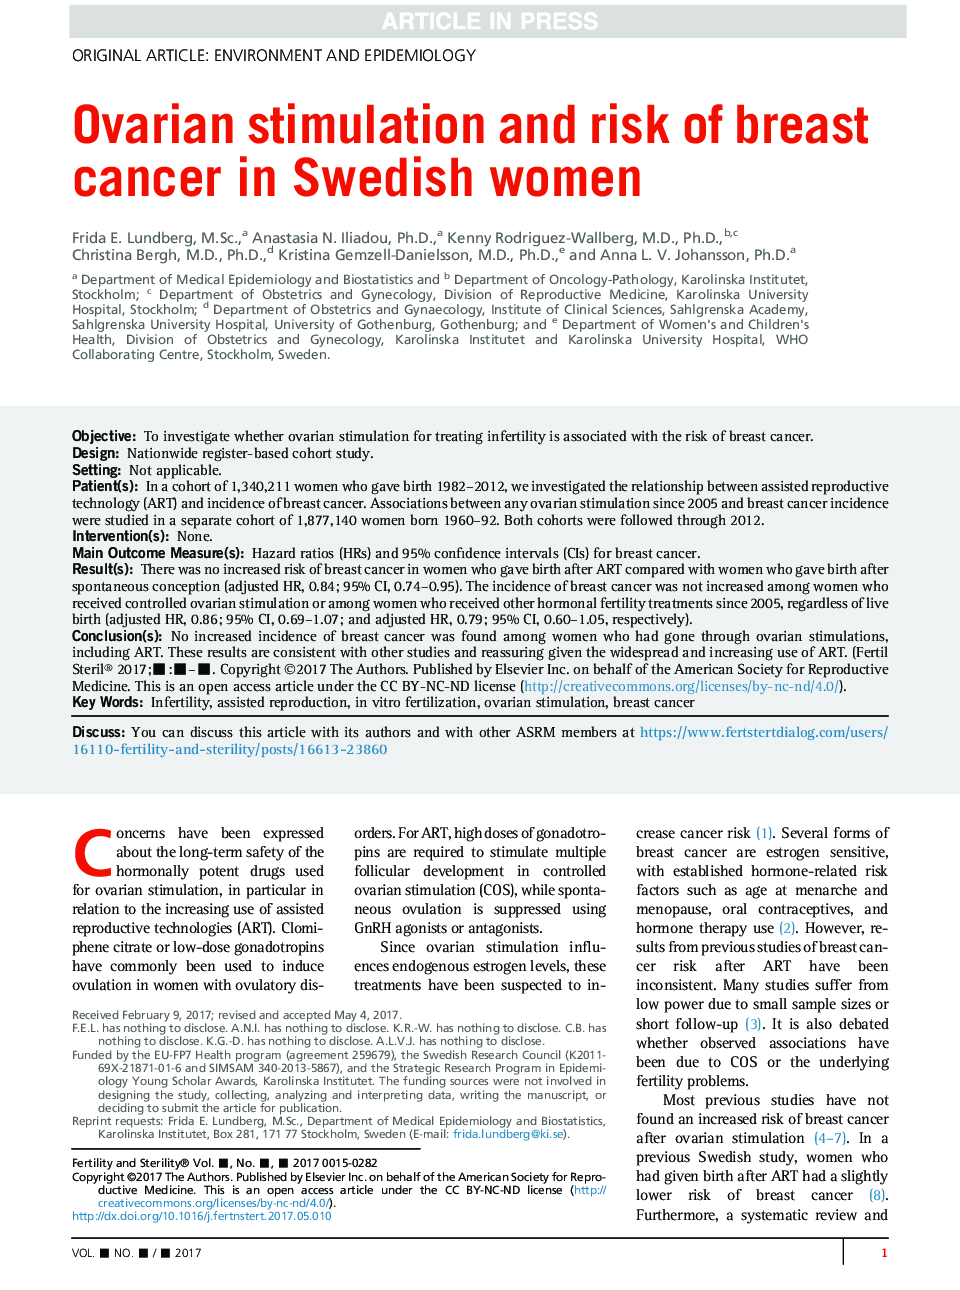 Ovarian stimulation and risk of breast cancer in Swedish women